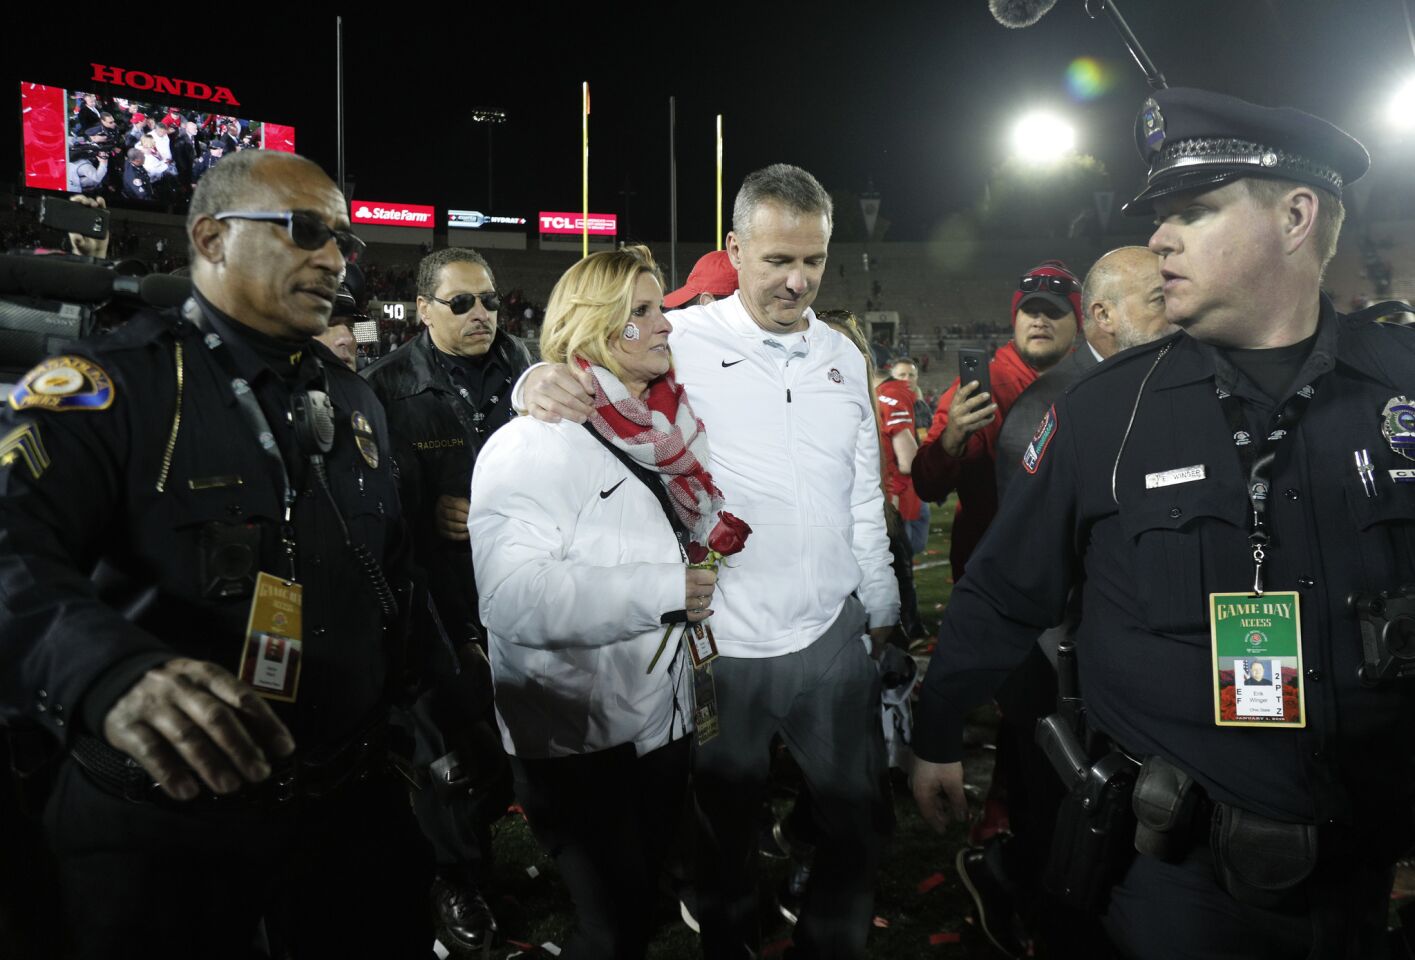 Ohio State Buckeyes coach Urban Meyer with his wife Shelley leave the field with a police escort after beating Washington 28-23 at the Rose Bowl on Jan. 1.